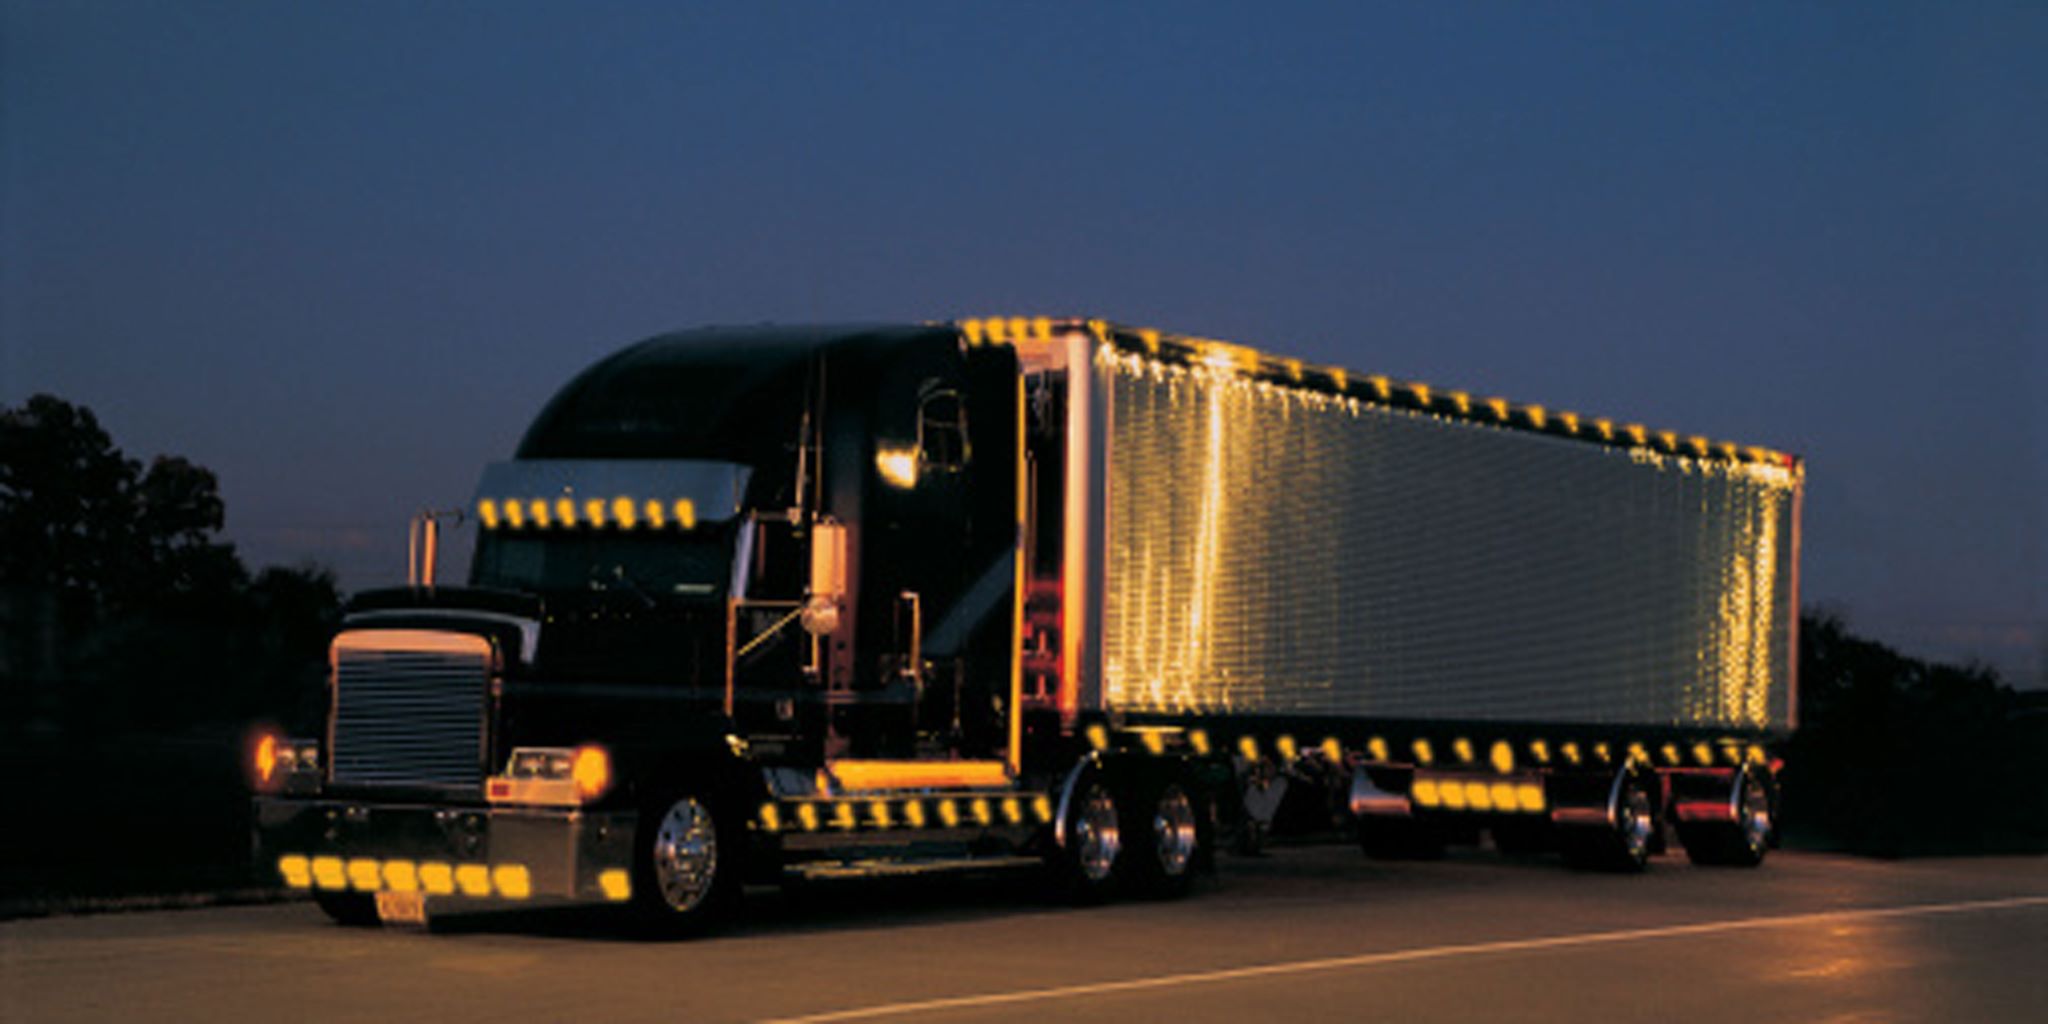 Truck Driving at Night